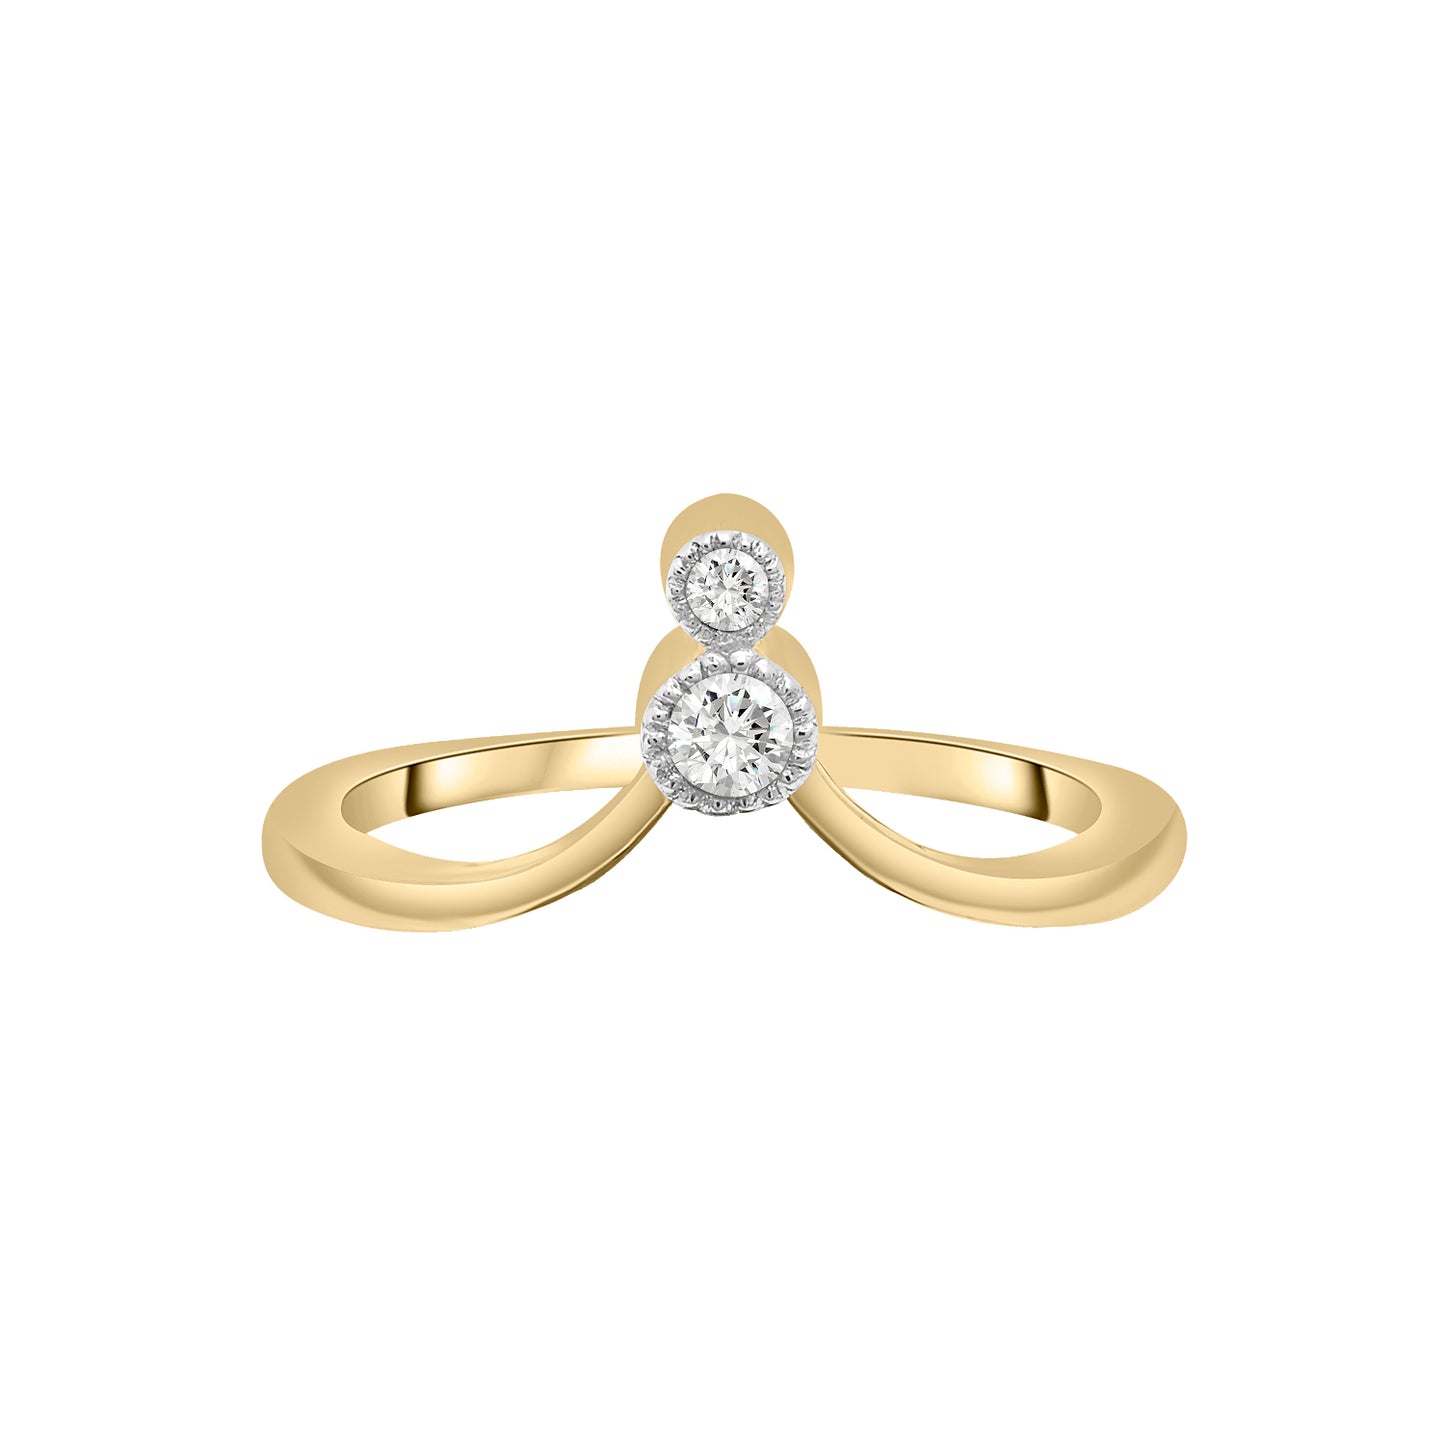 Heluviee Arched Diamond Ring In Golden coated